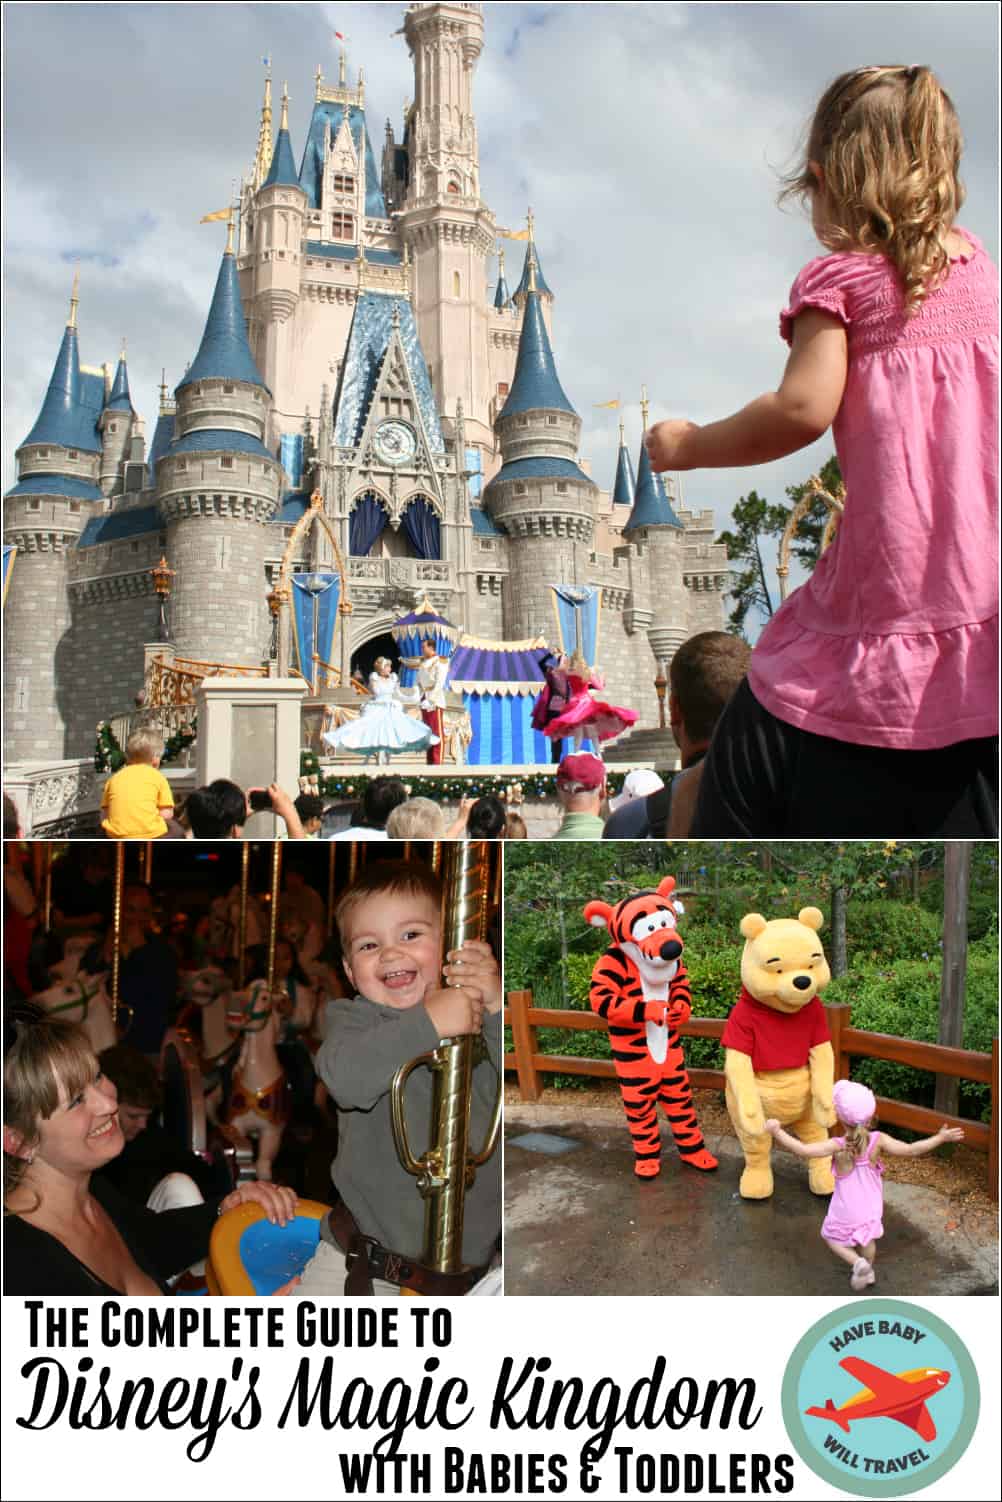 Disney's Magic Kingdom with Babies & Toddlers | Have Baby Will Travel